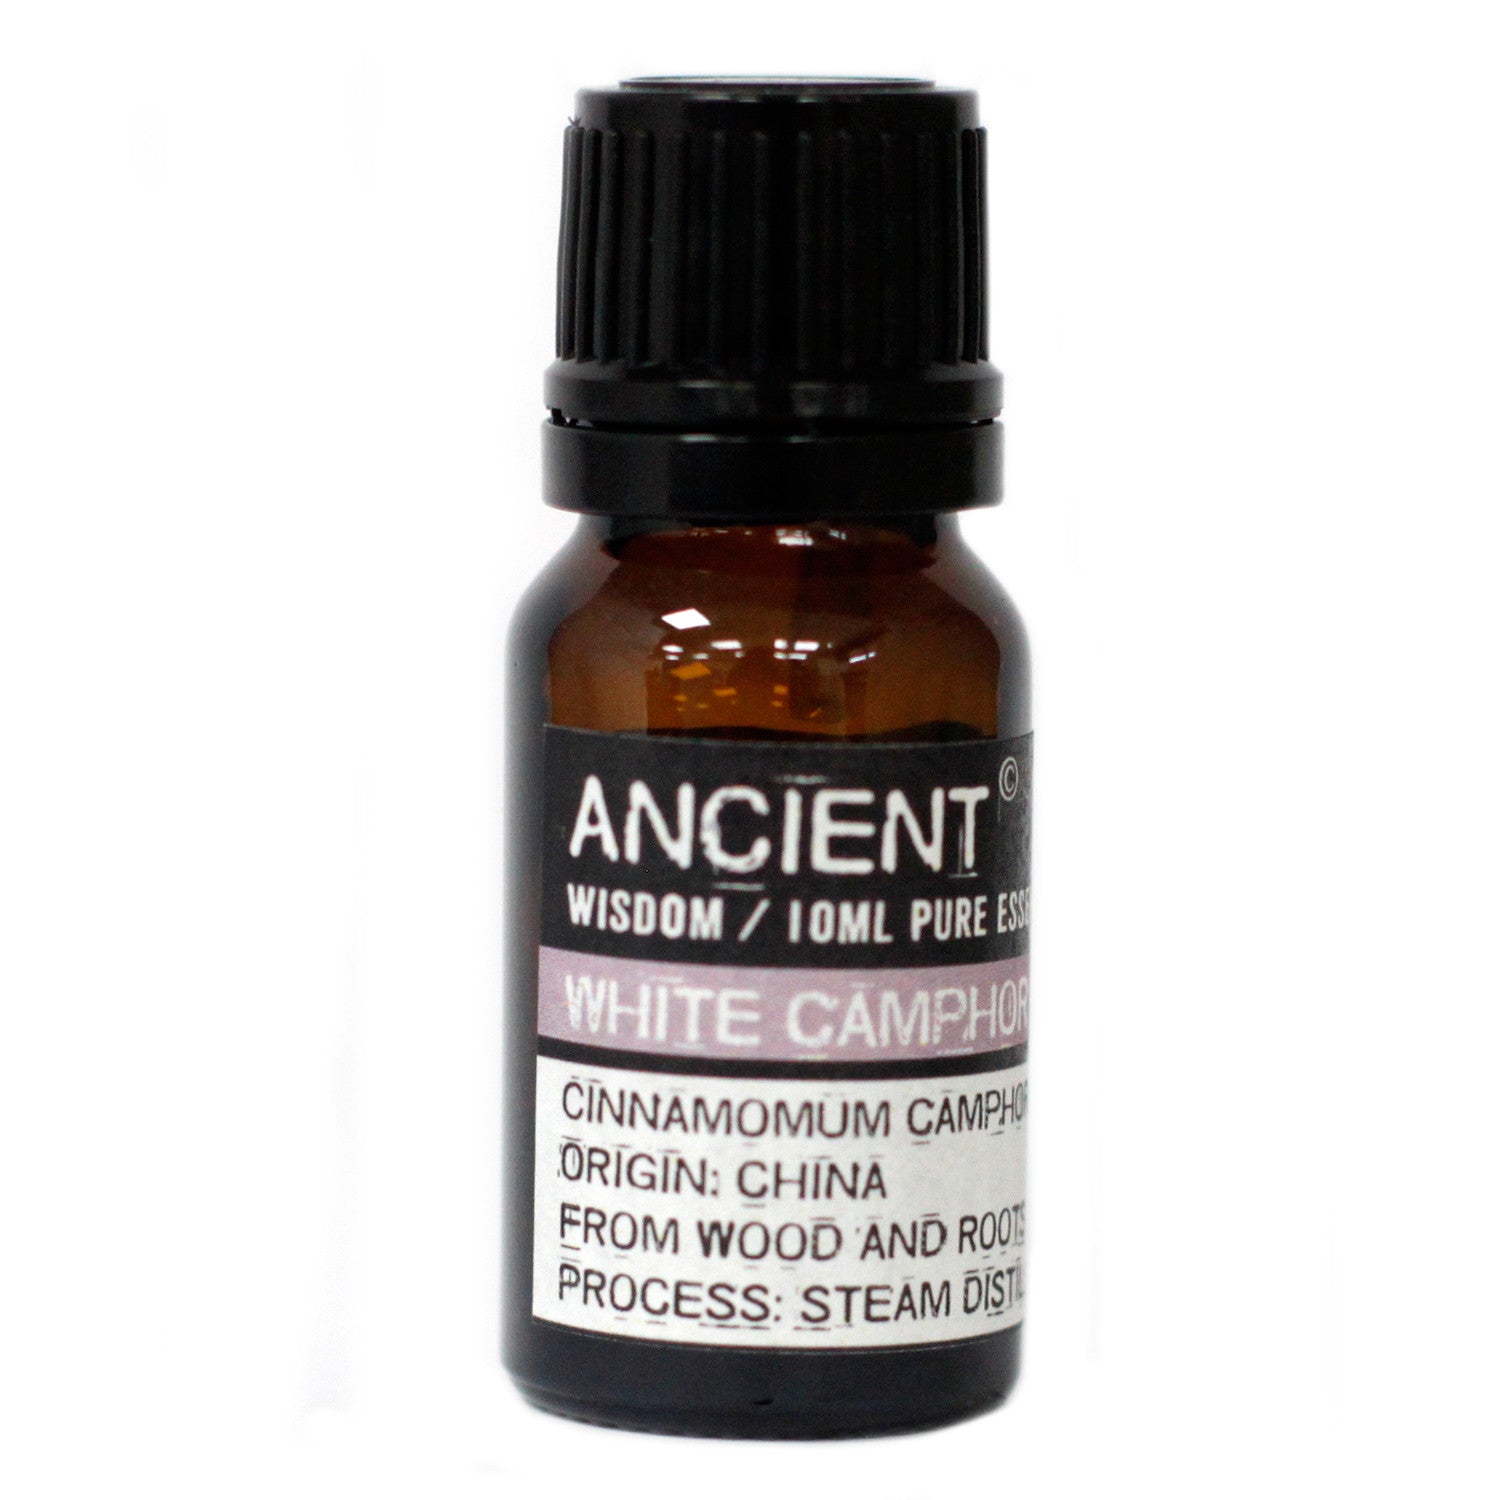 View 10 ml White Camphor Essential Oil information